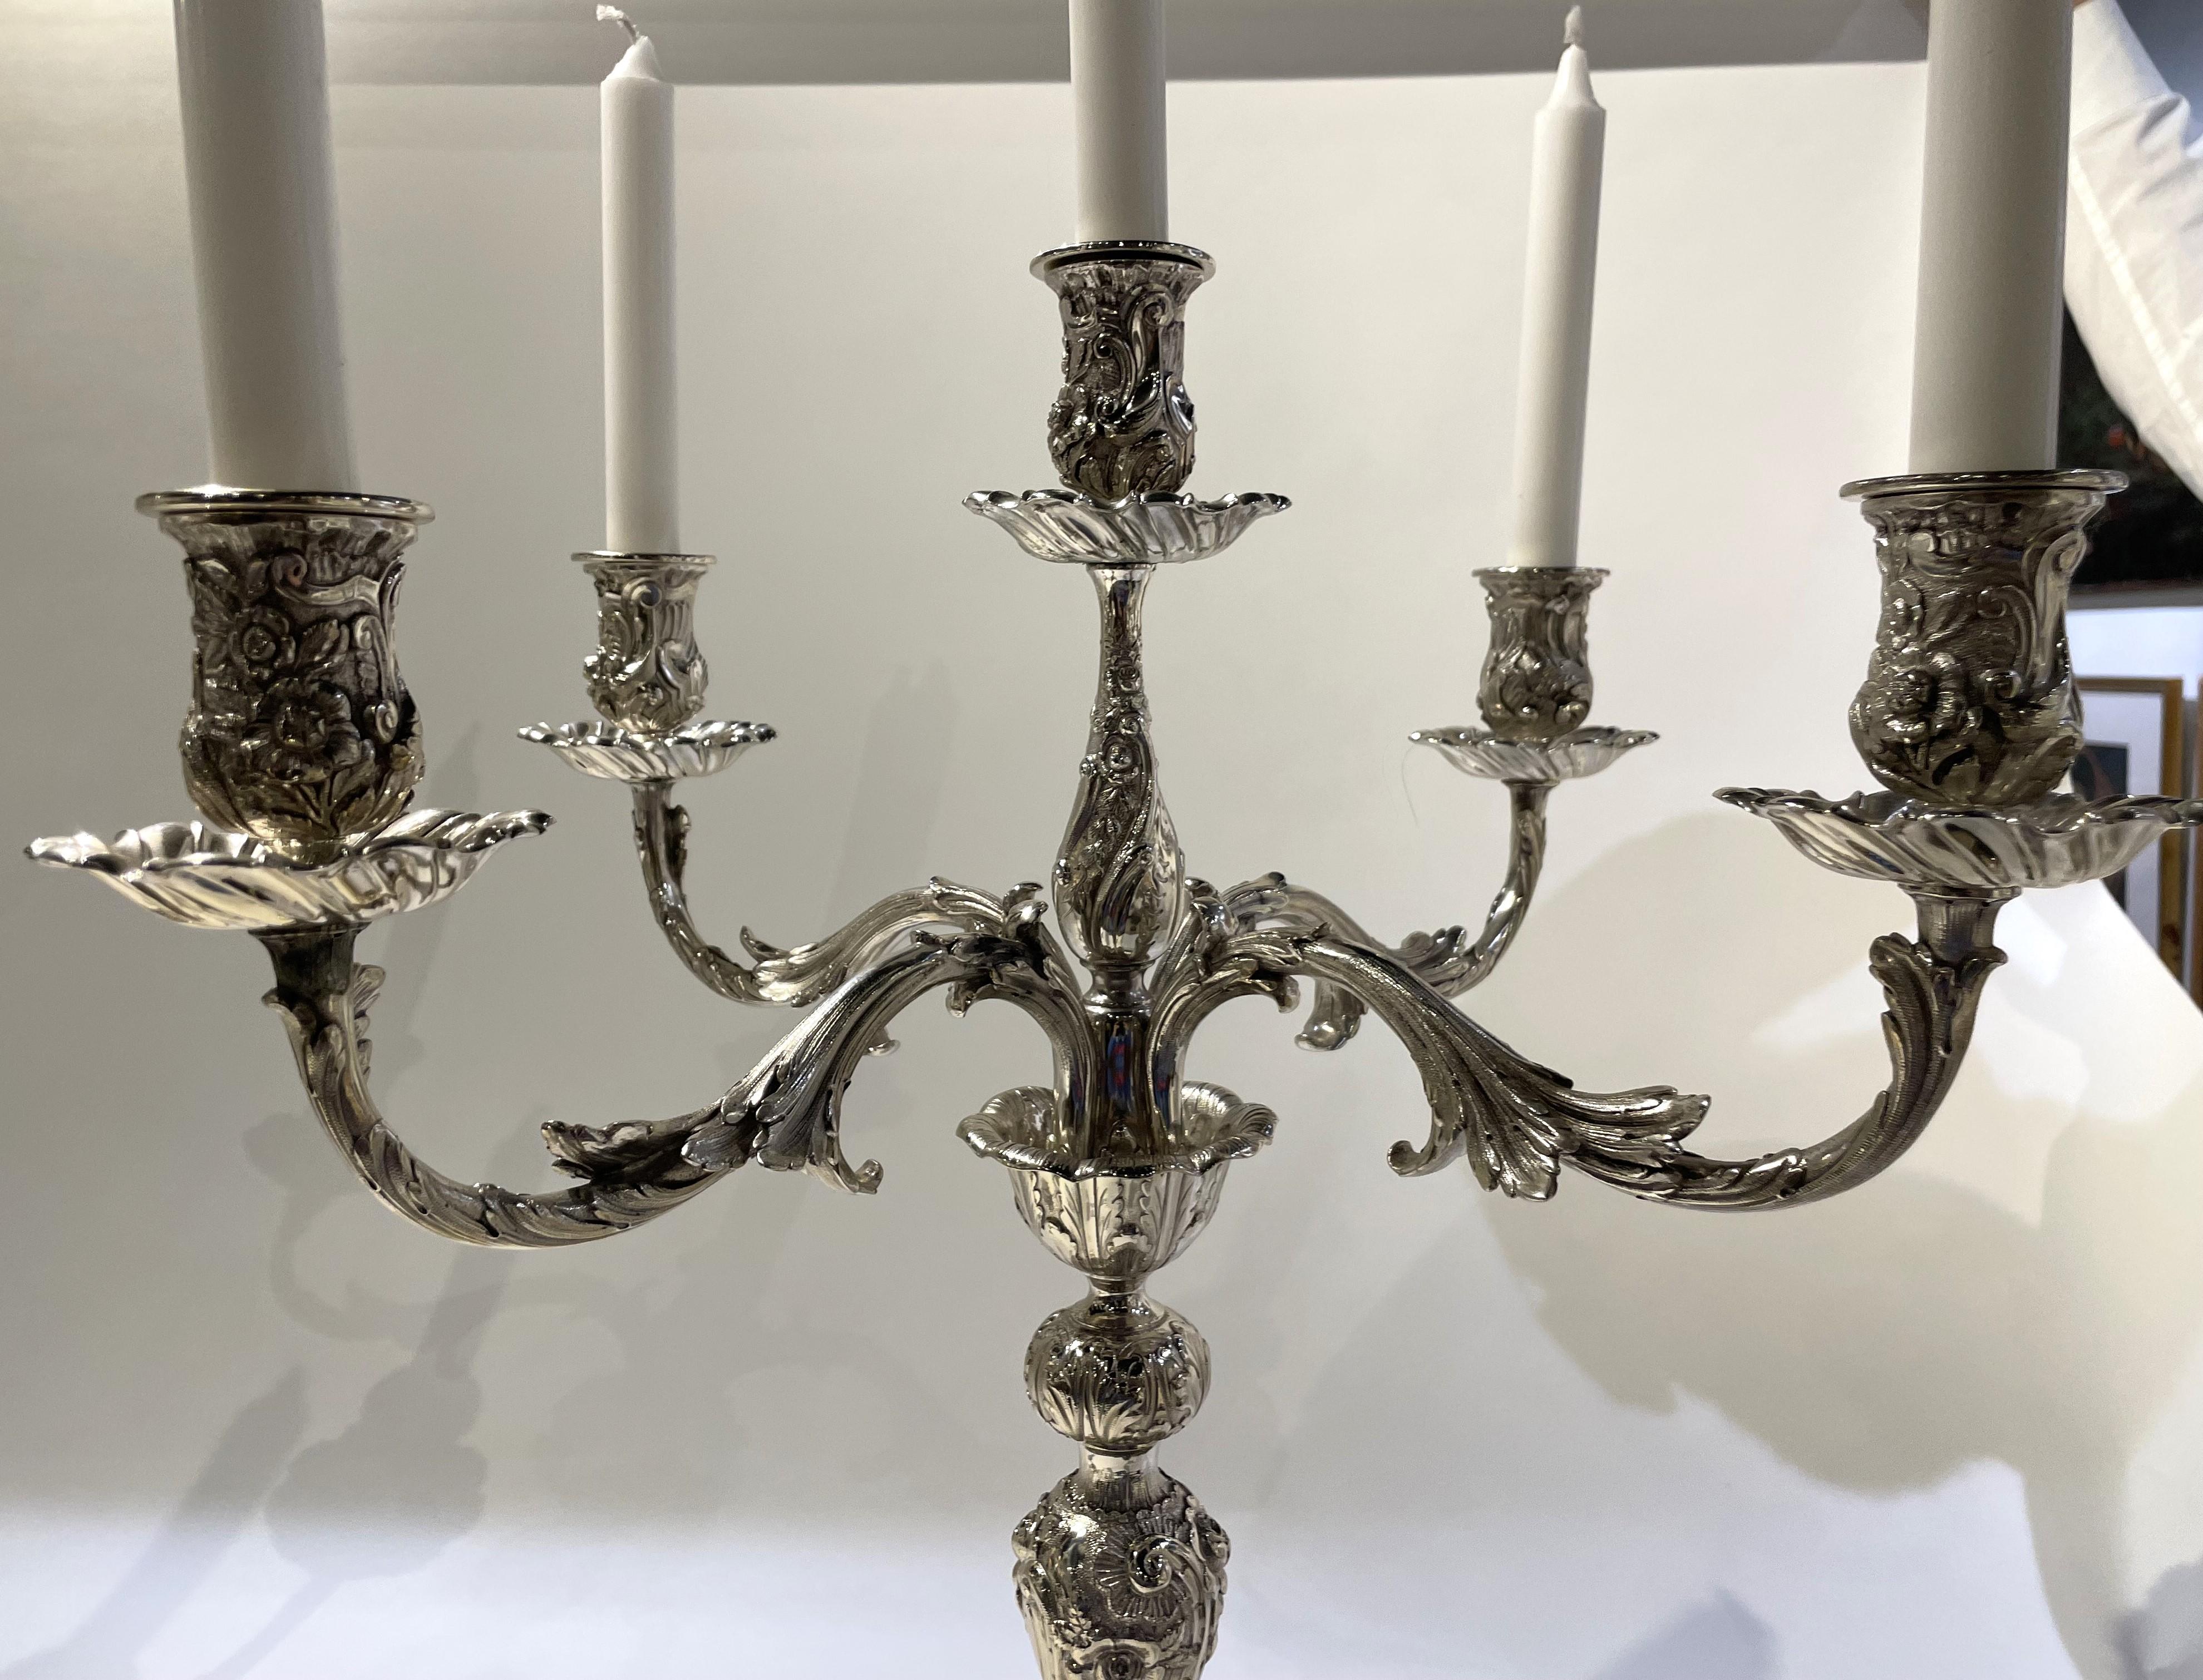 Repoussé Pair of Tiffany & Co. Sterling Silver 5-Light Monumental Repousse Candelabra For Sale